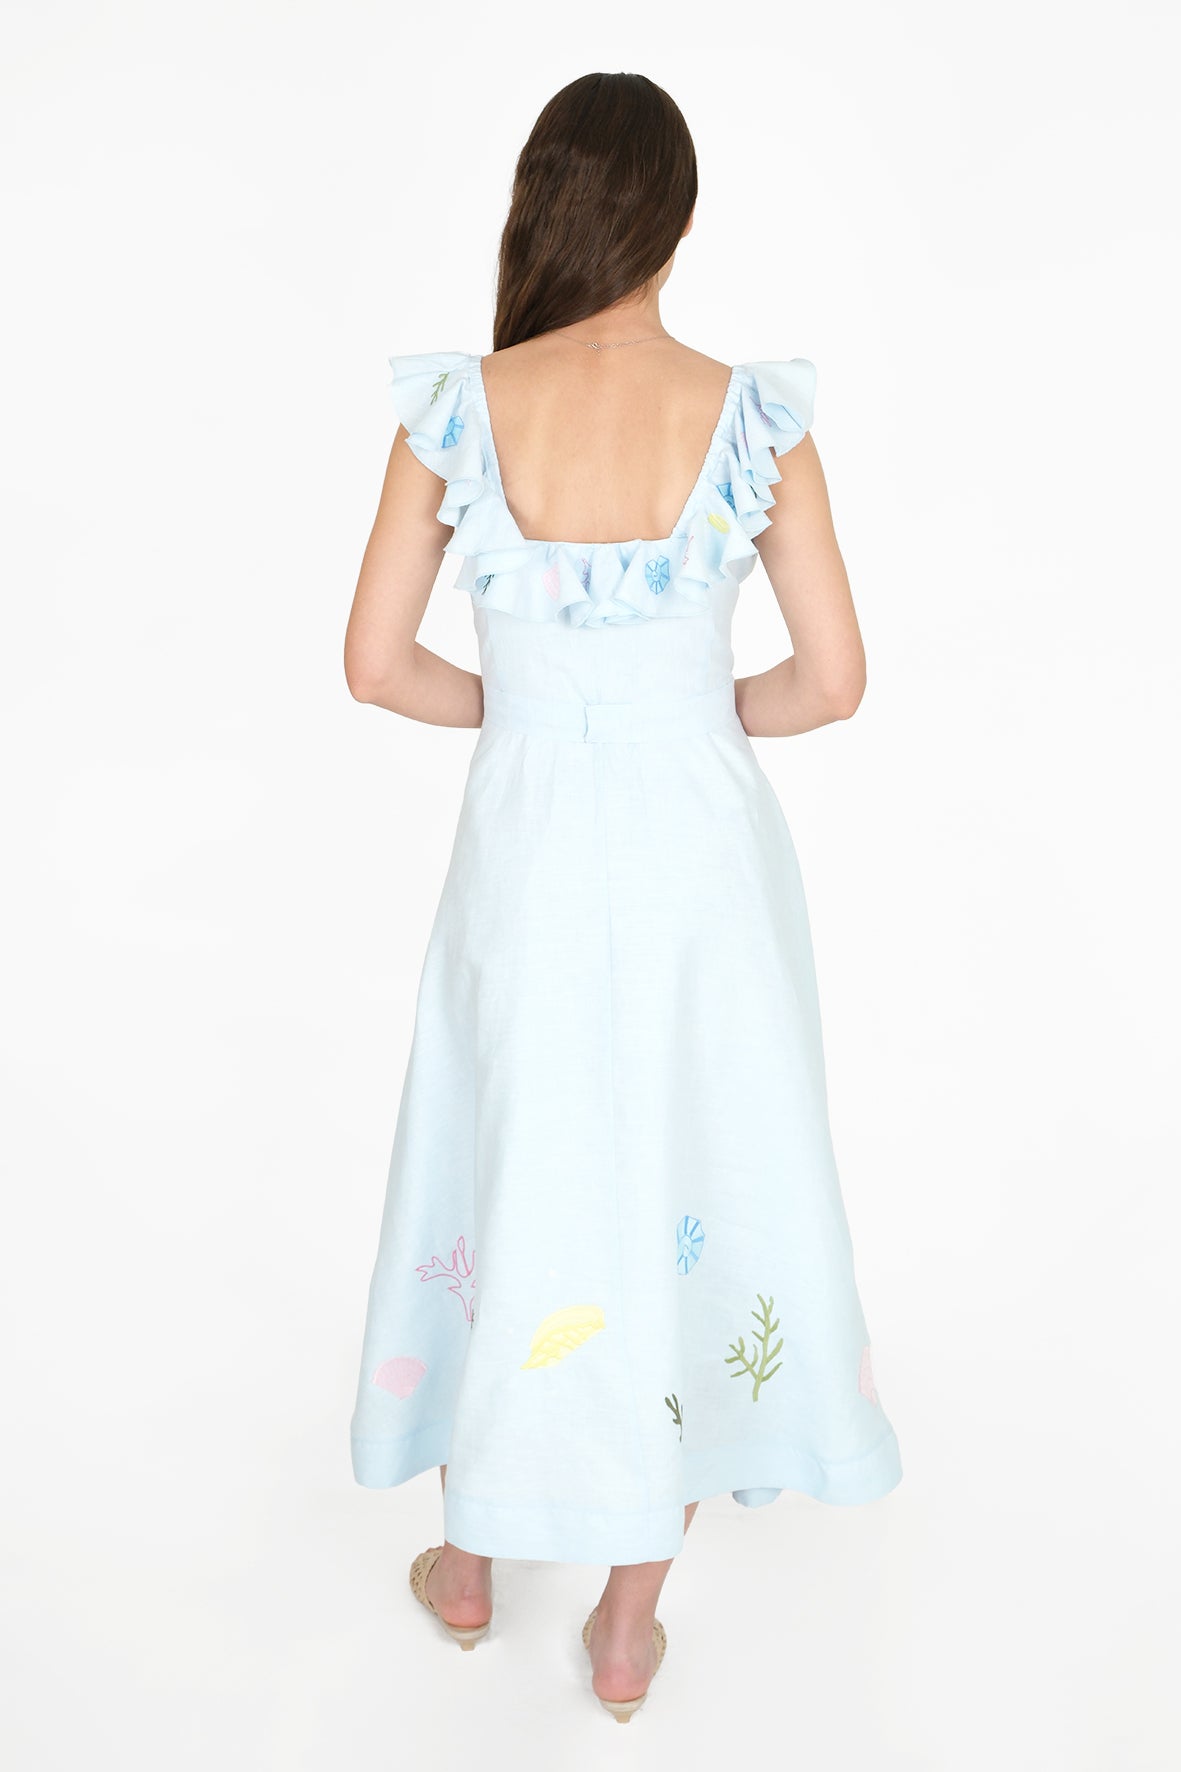 Back View of the Bella Dress with Ruffles and Sea-Inspired Embroidery Part of the Fanm Mon x Sarah Bray Collaboration 